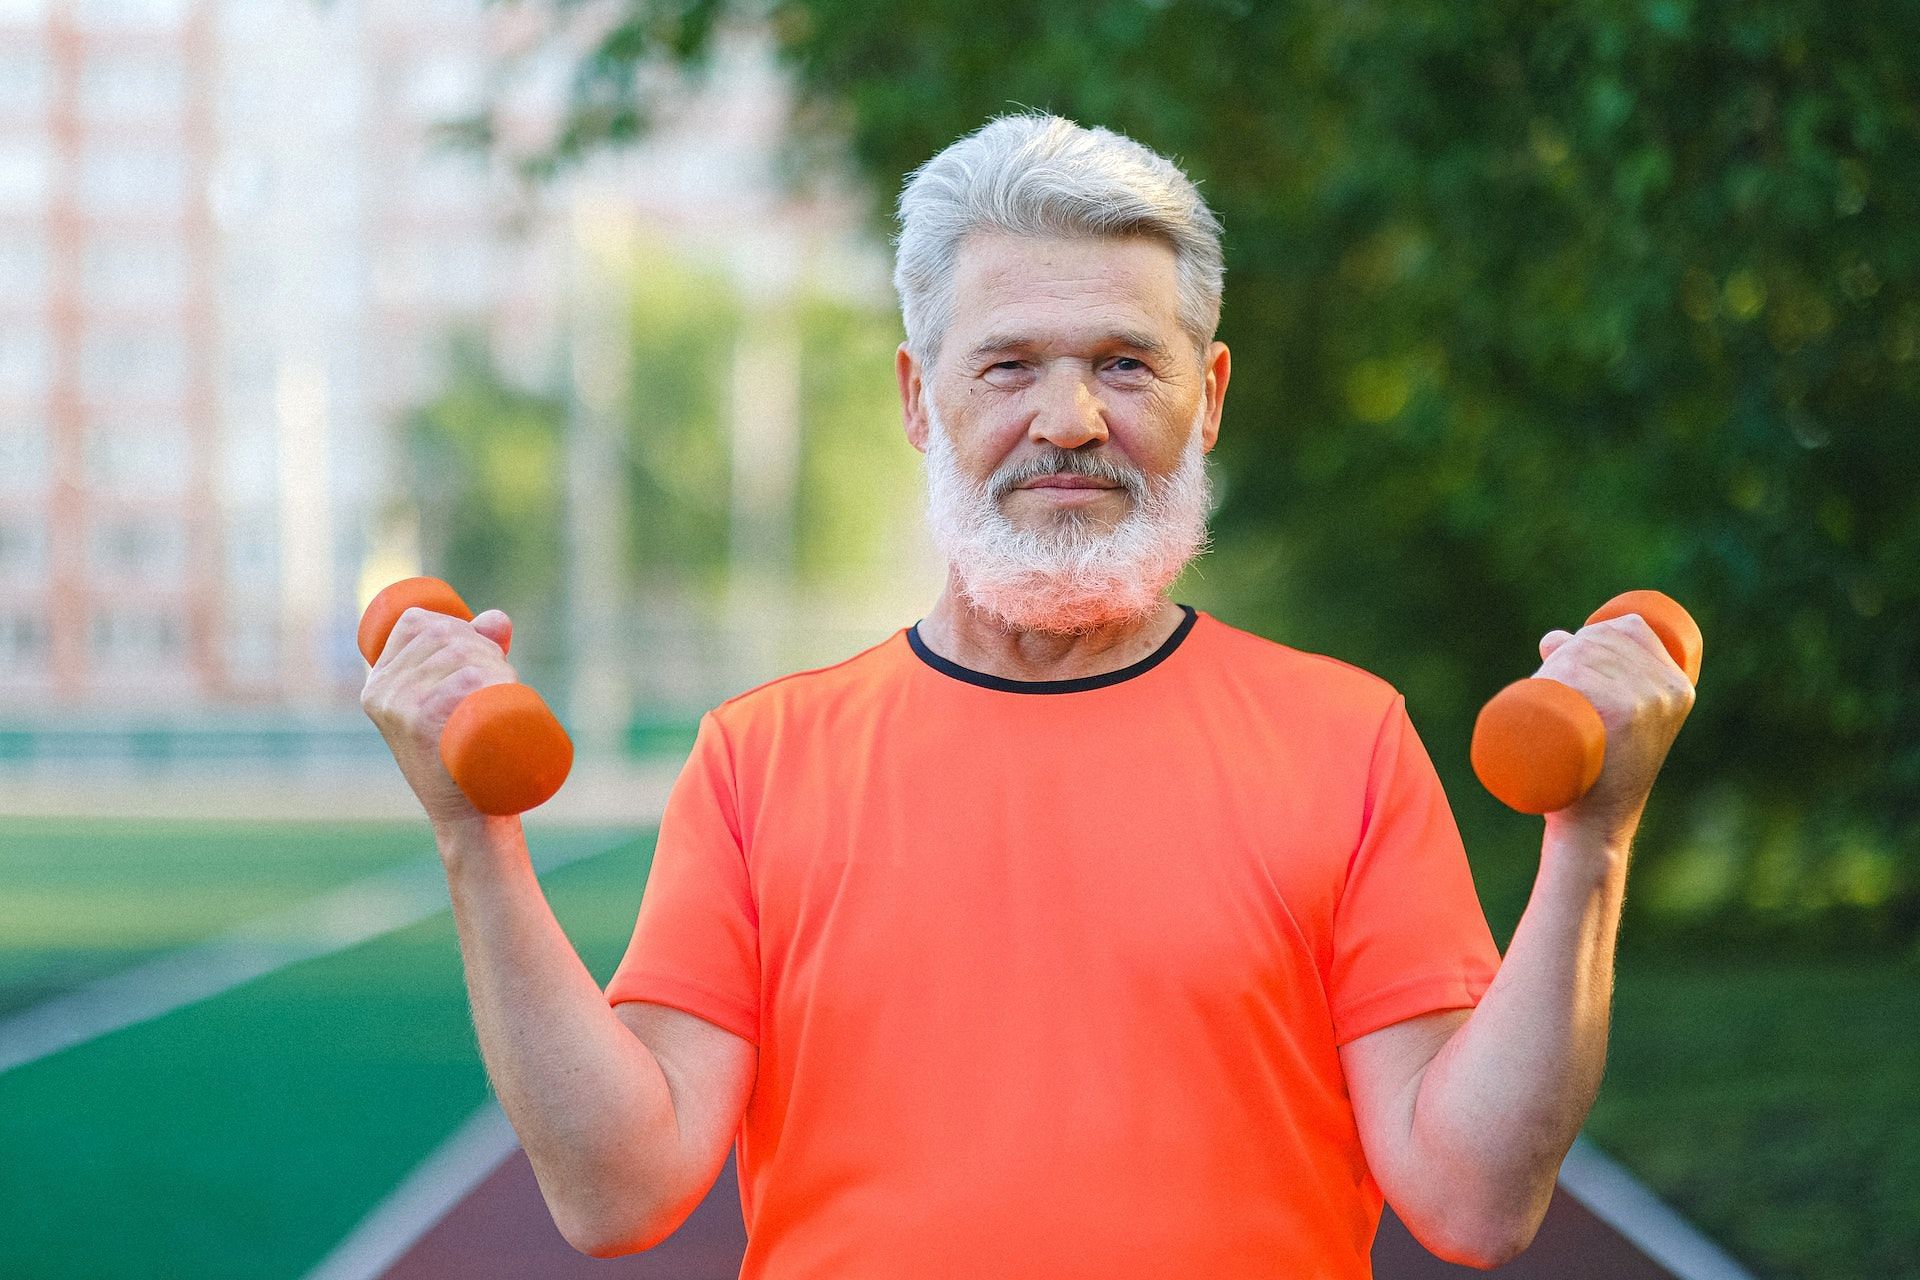 There are several exercises to keep an aging body fit and strong. (Photo via Pexels/Anna Shvets)